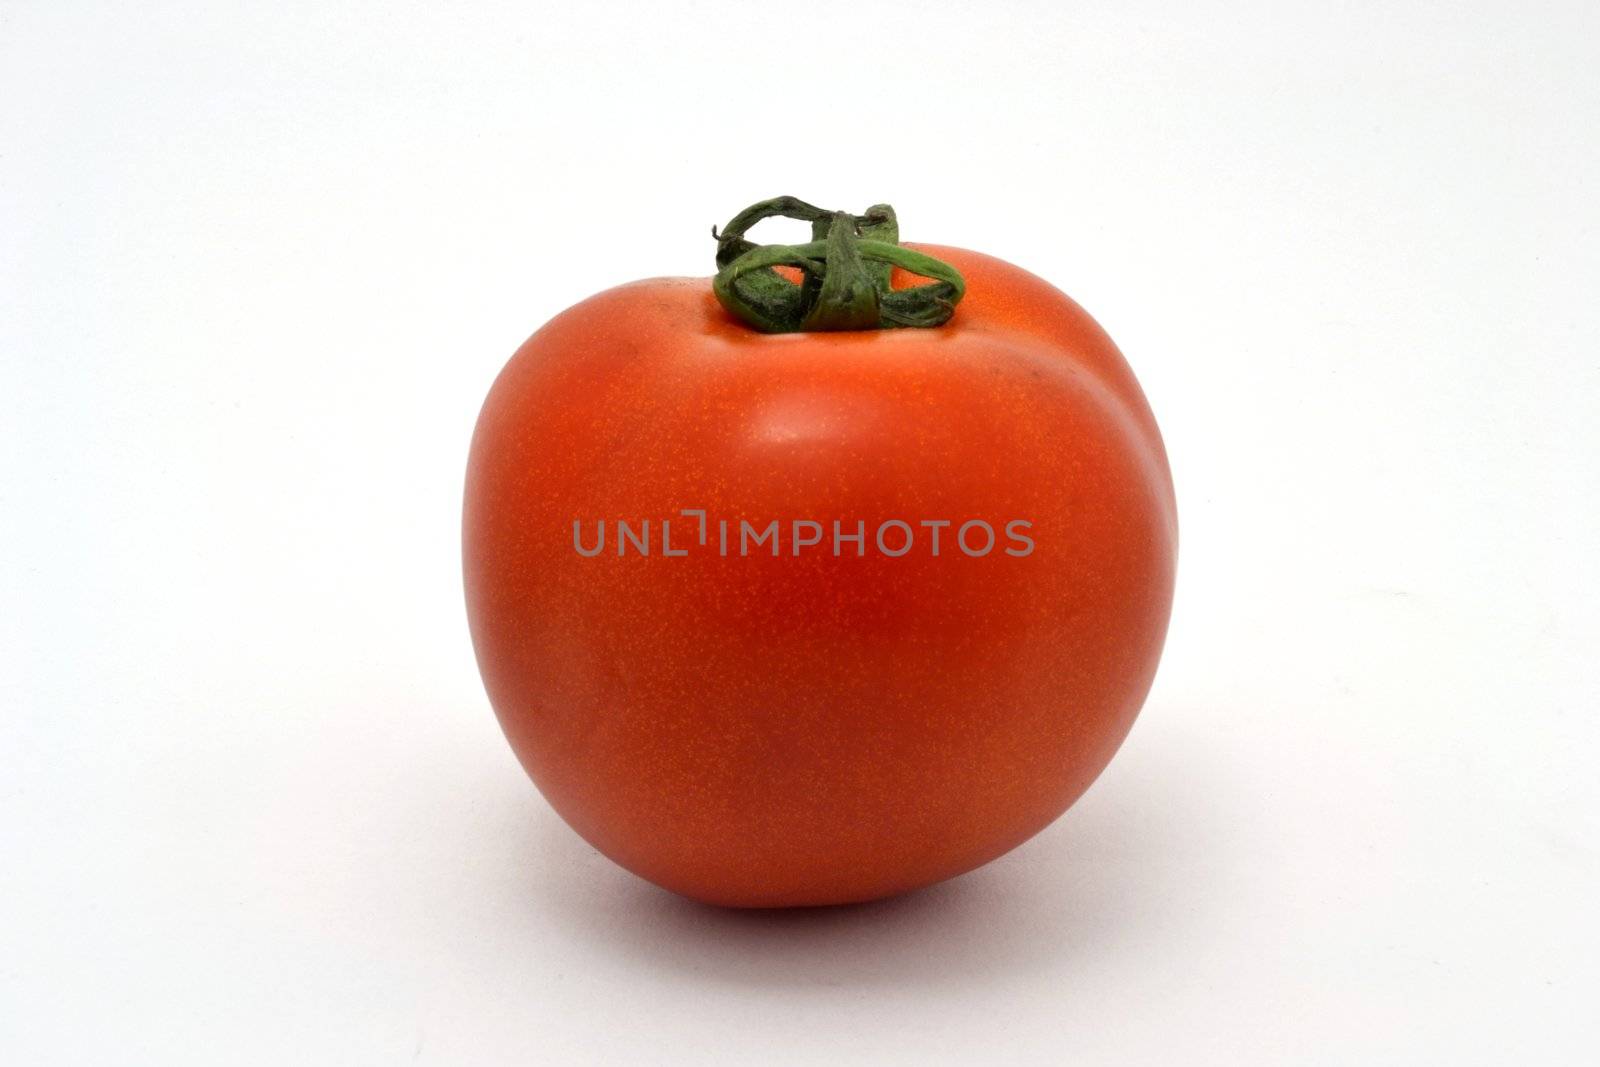 The tomato by Autre